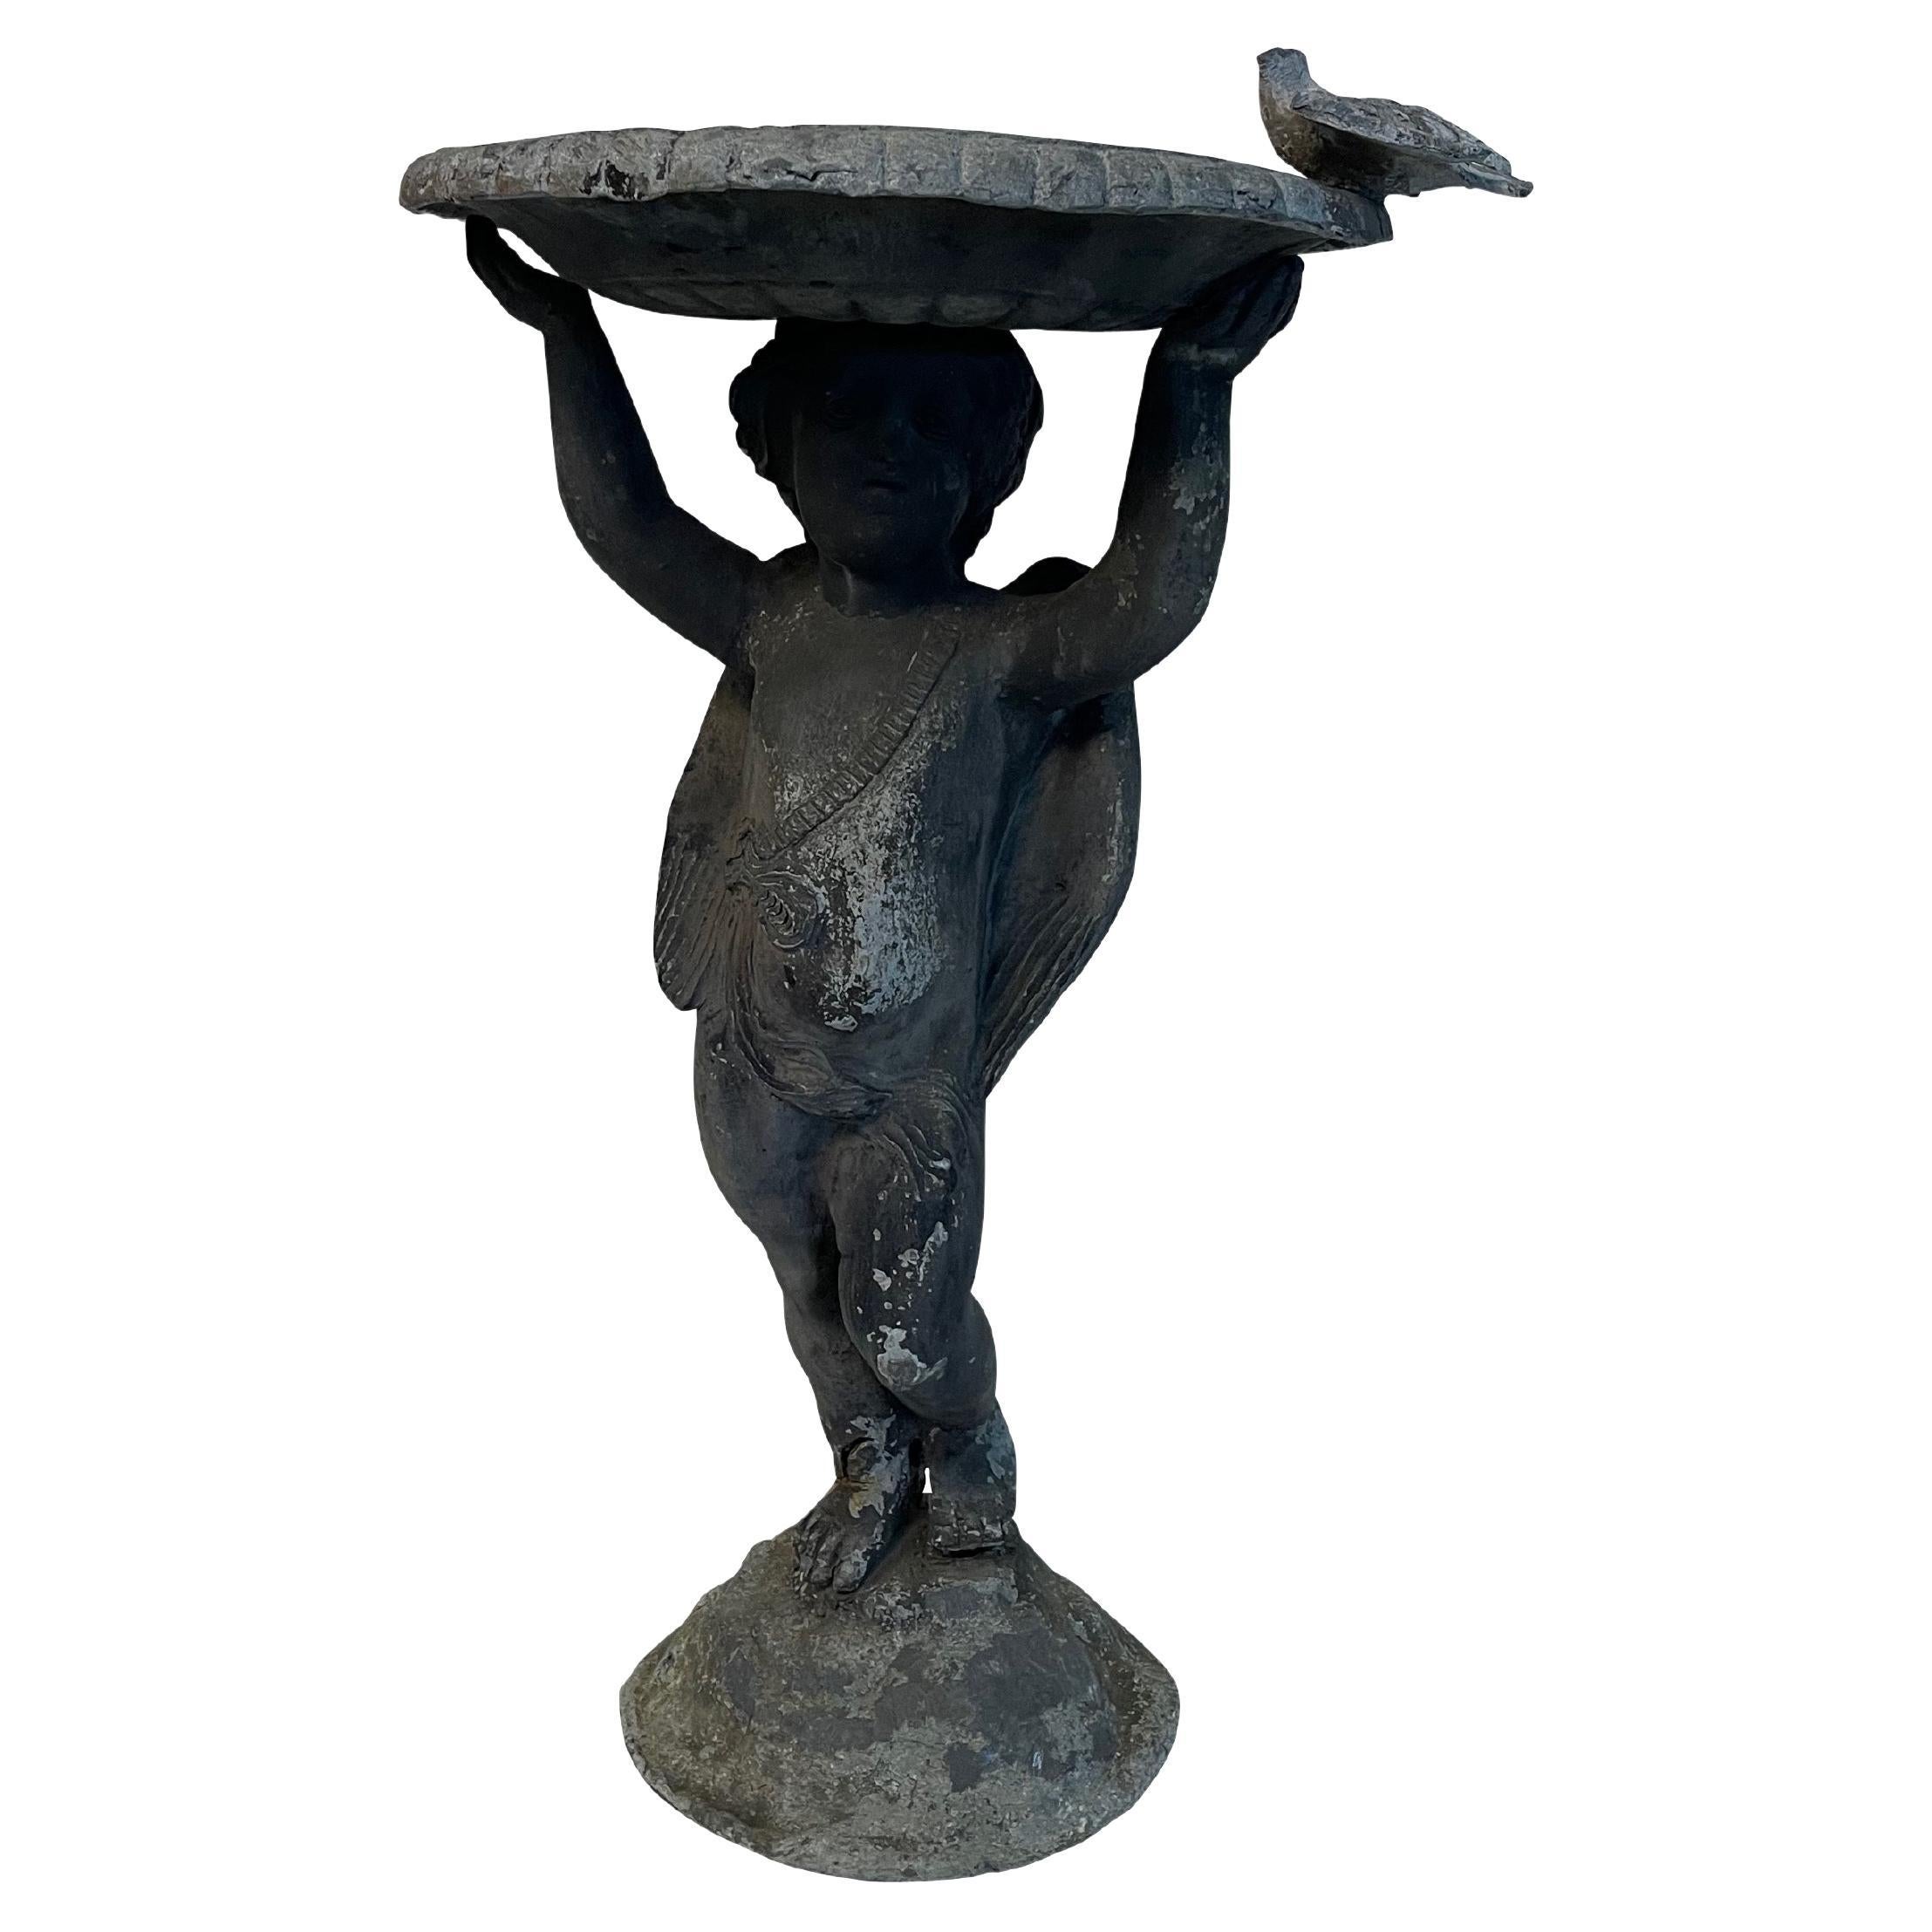 English lead birdbath in a small size. Beautifully detailed figural base with a small winged cherub or putti with garland decoration holding a basin above his head. The basin has a reticulated center with a braided edge and the most perfect petite